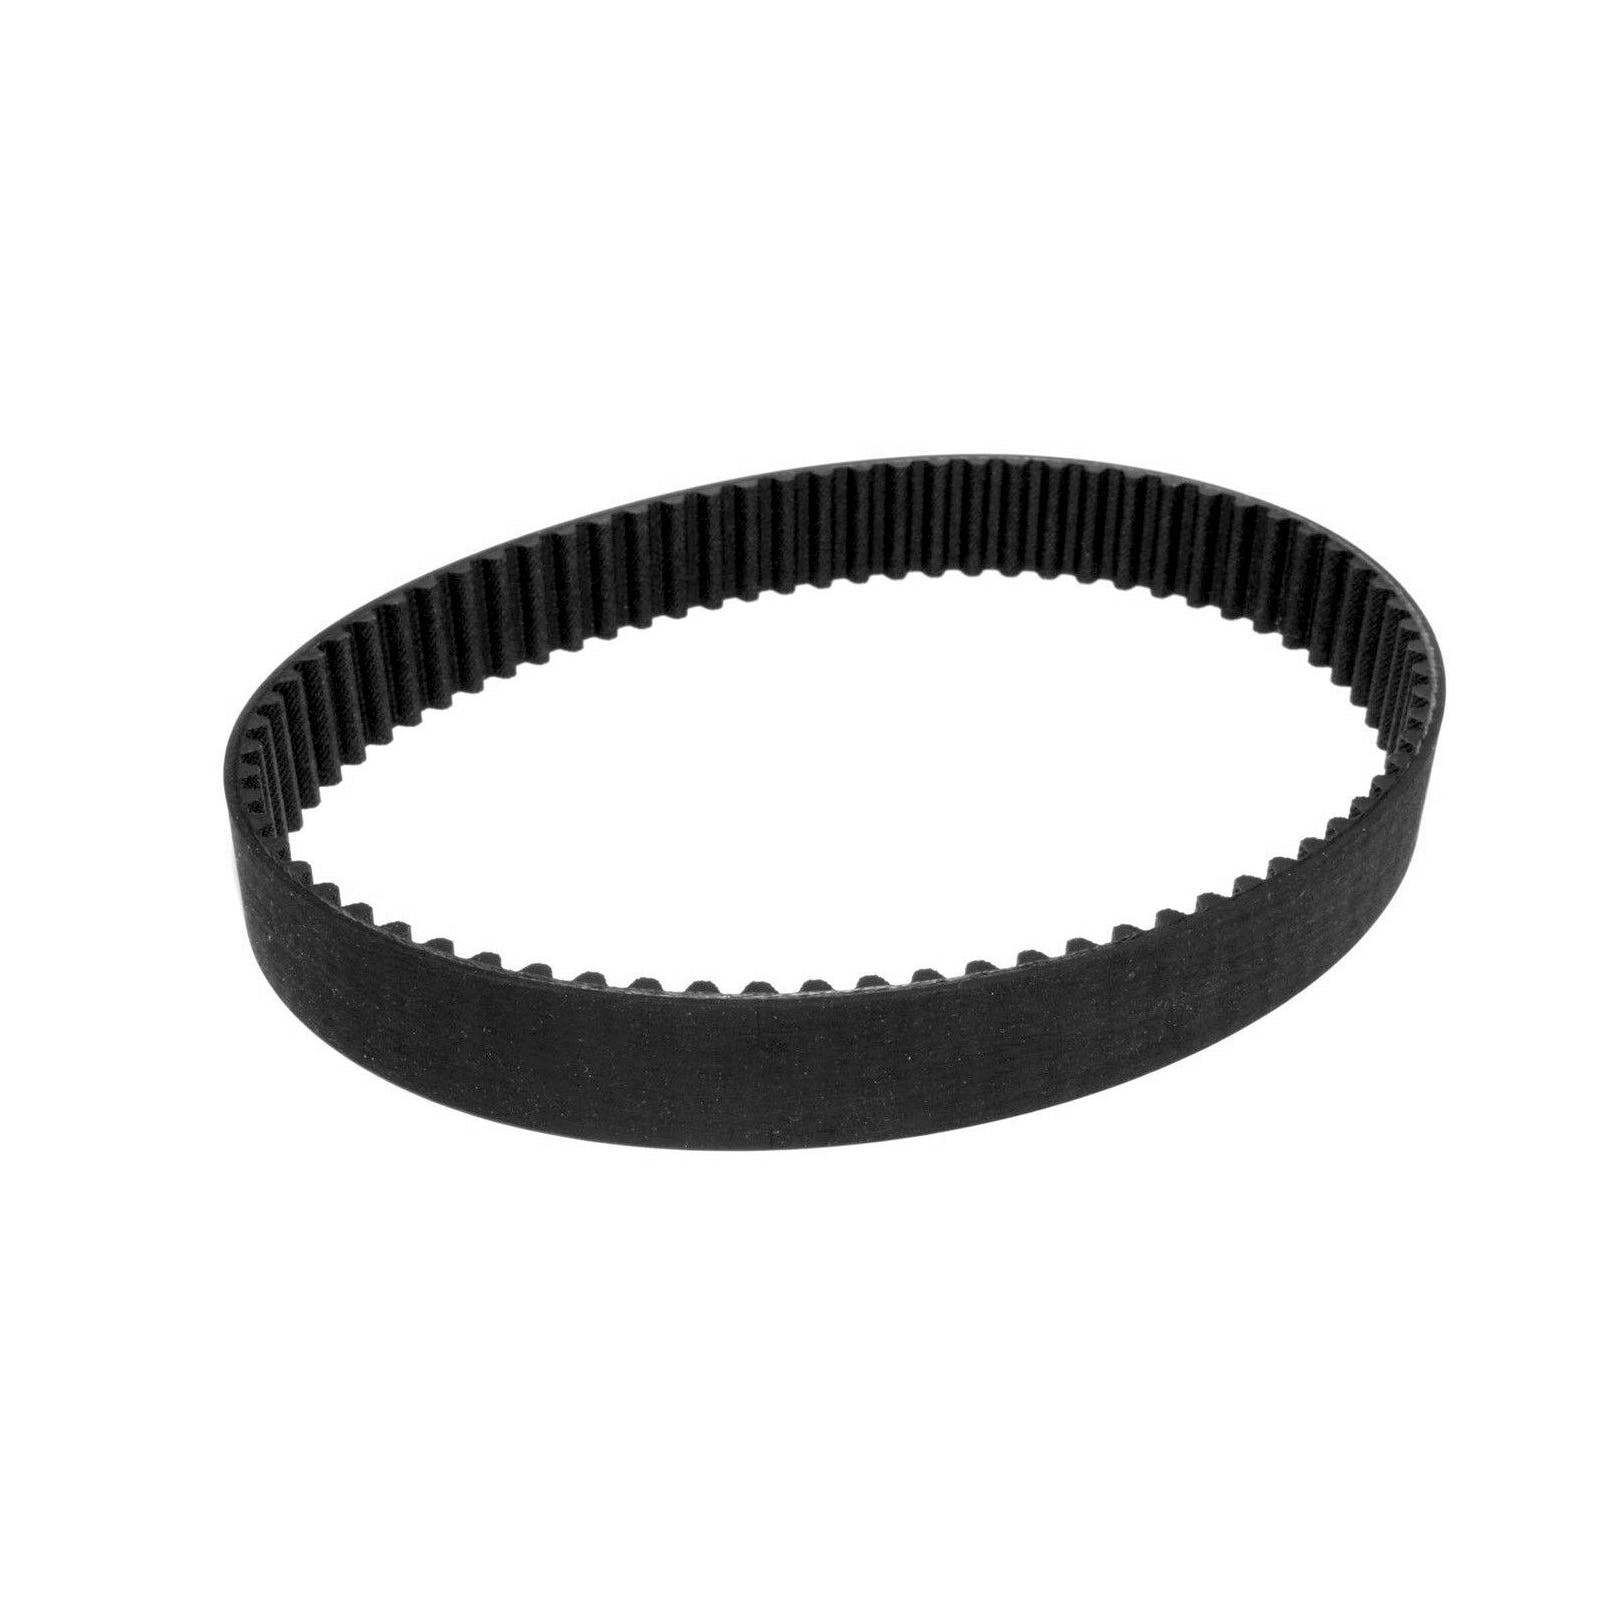 Speedmaster PCE629.1003 75-Tooth 29.5 mm X 597mm Timing Belt Drive Replacement Belt